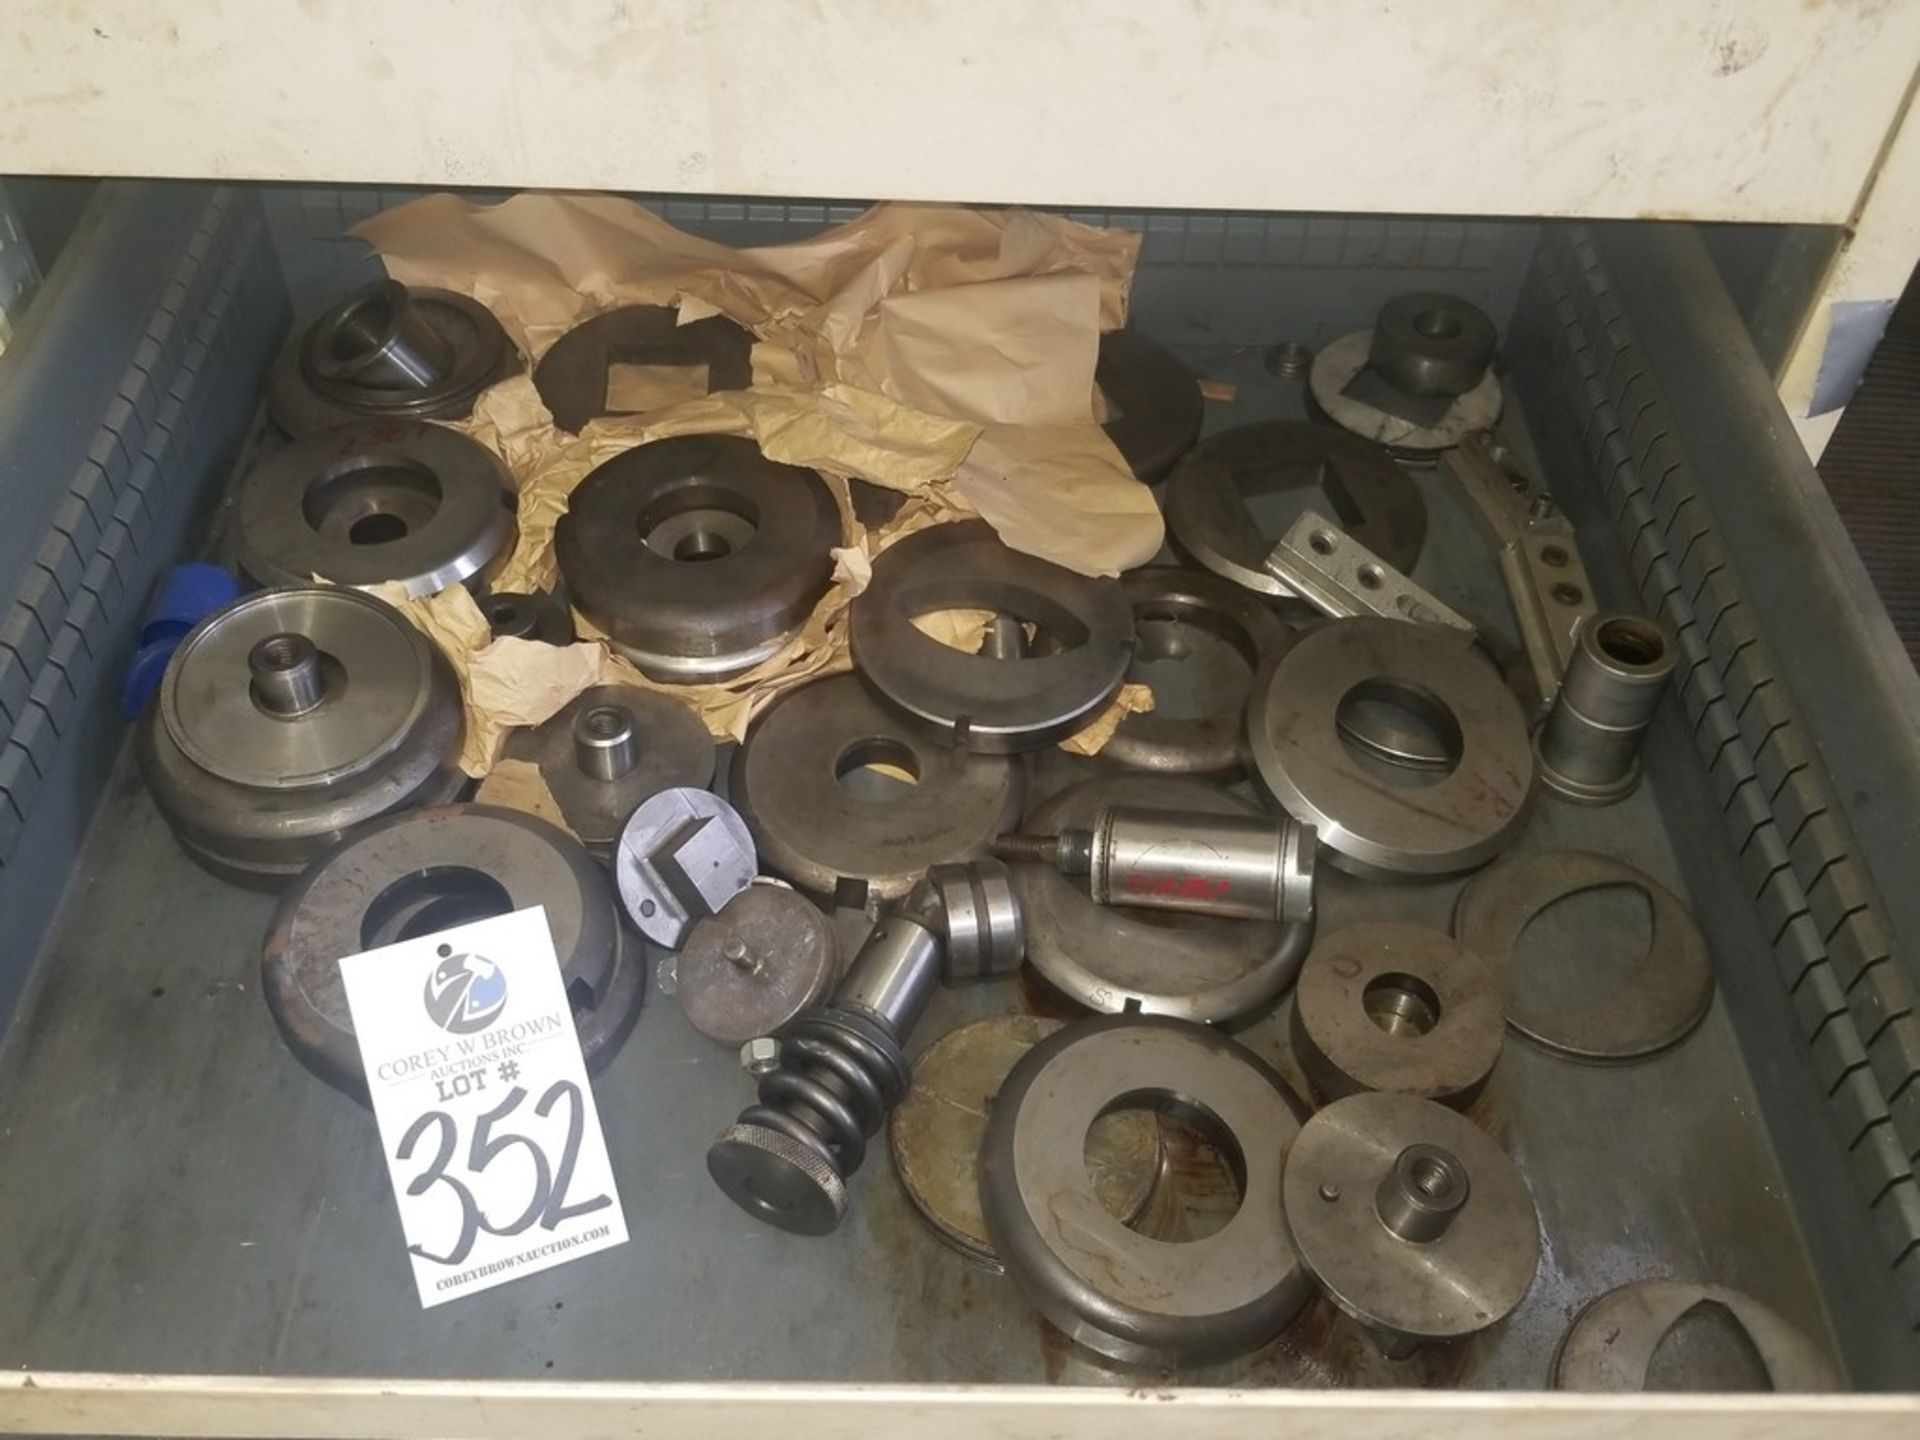 Assorted Punches and Other Tooling Inside Vidmar Toolbox